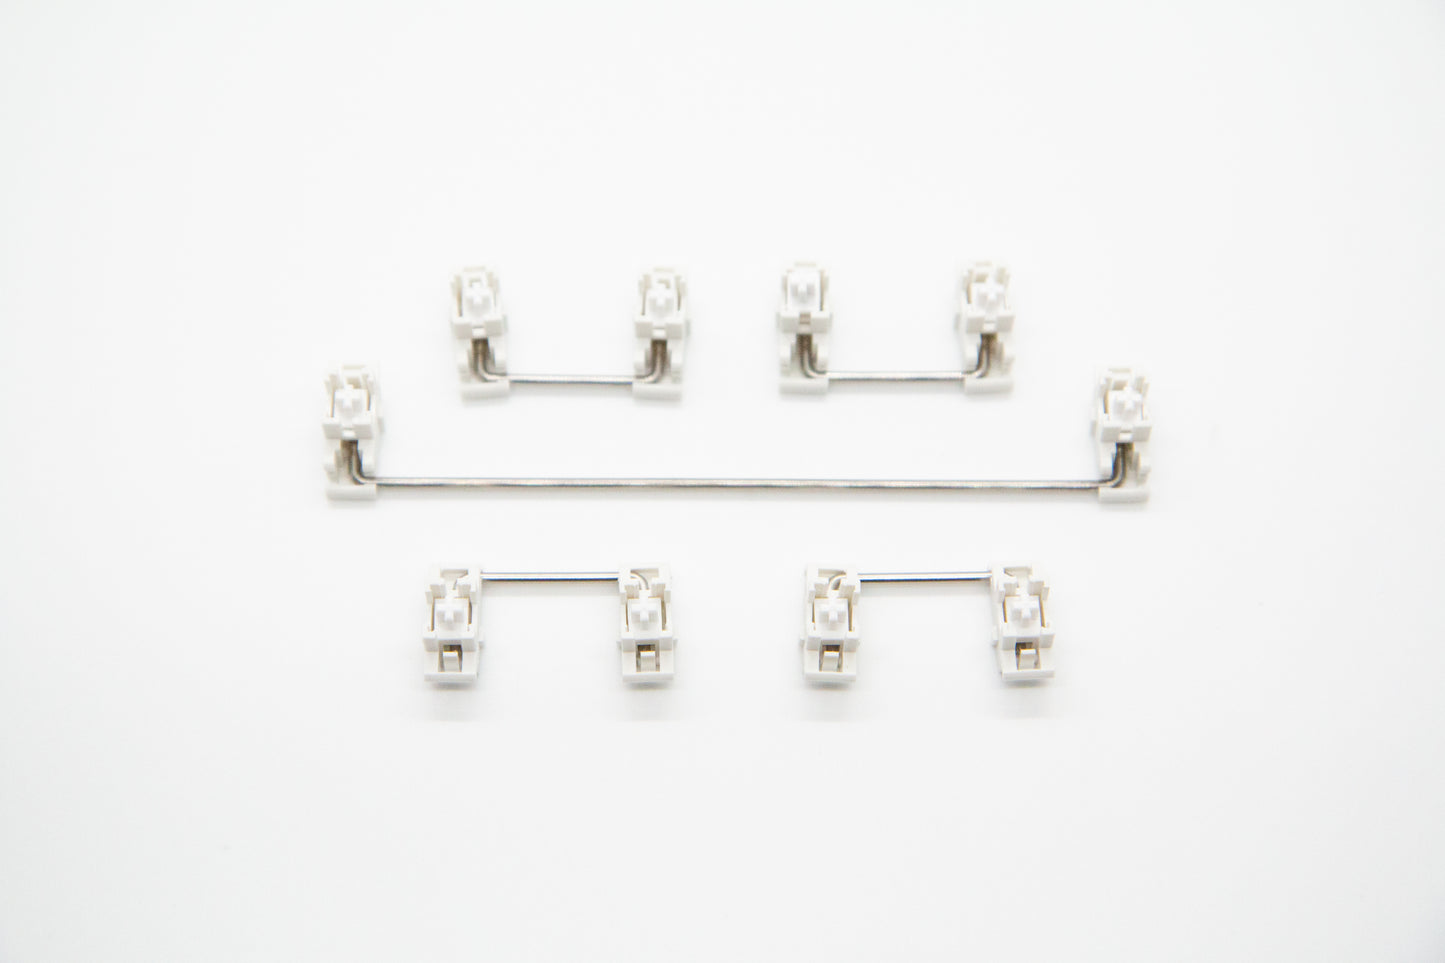 Overhead shot of PCB mounted white mechanical keyboard Durock stabilizer kit in 6.25 configuration with screws and washers